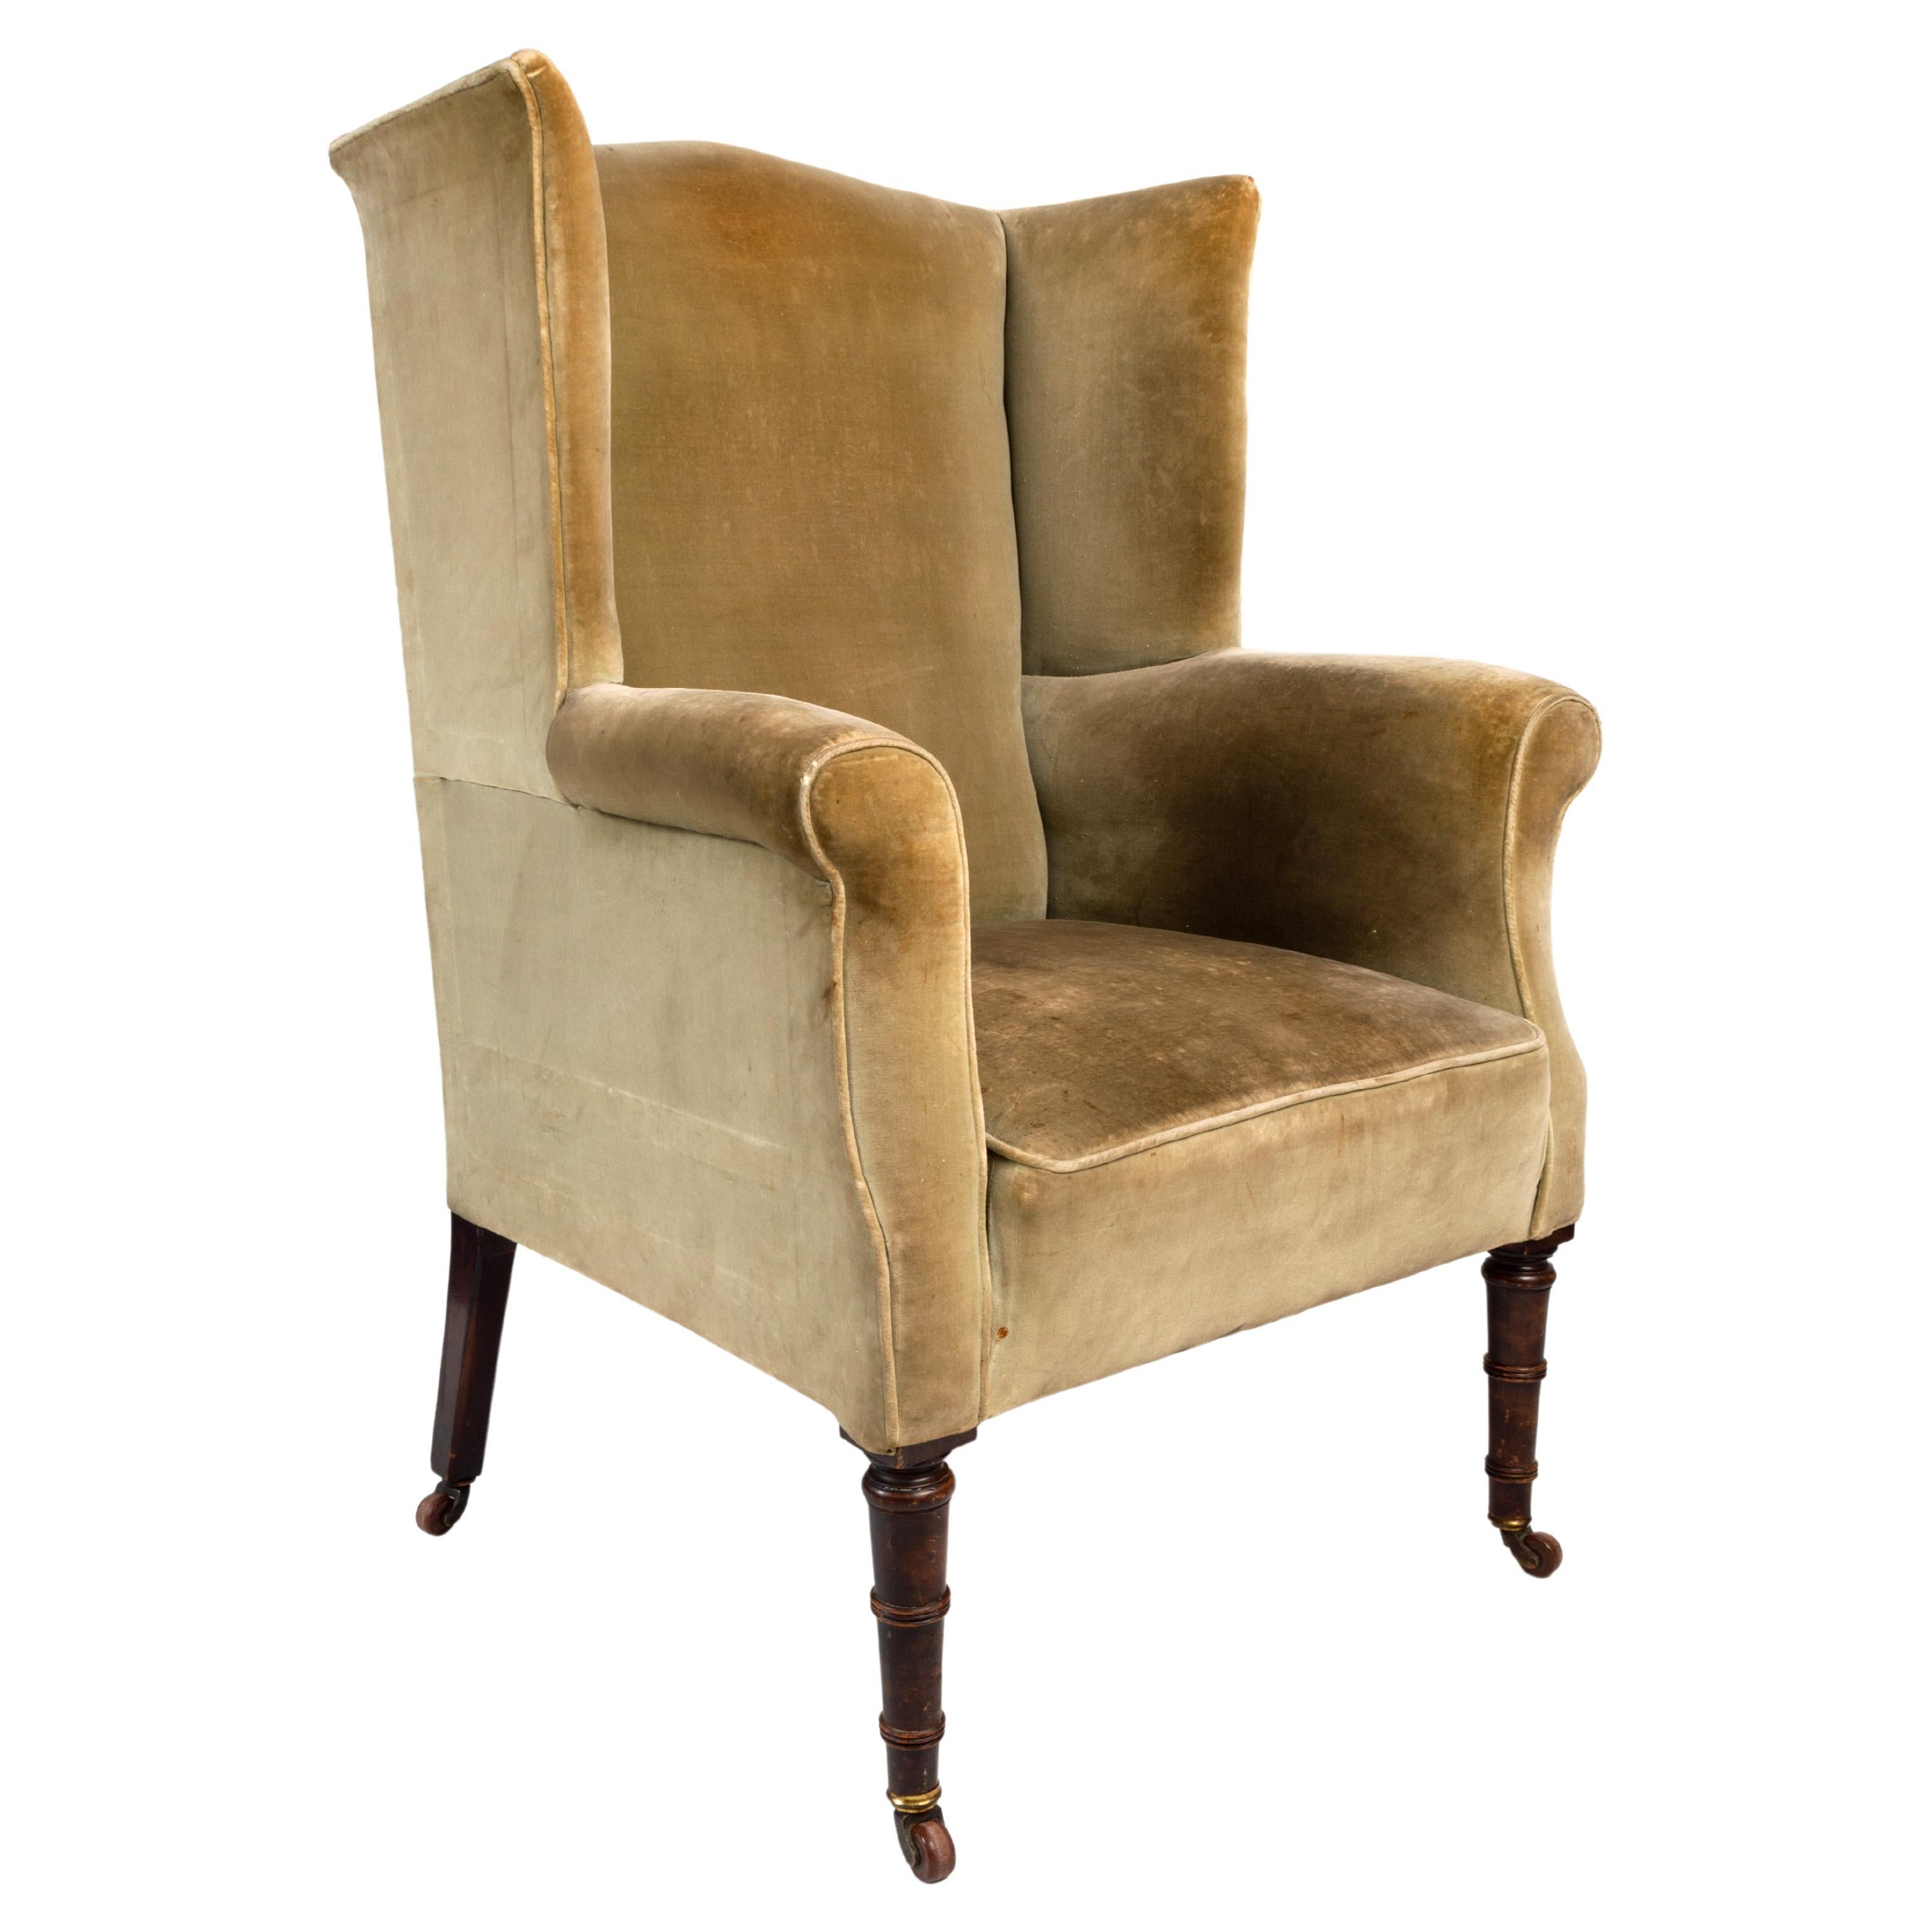 Antique English Regency Wing Armchair, circa 1820 For Sale